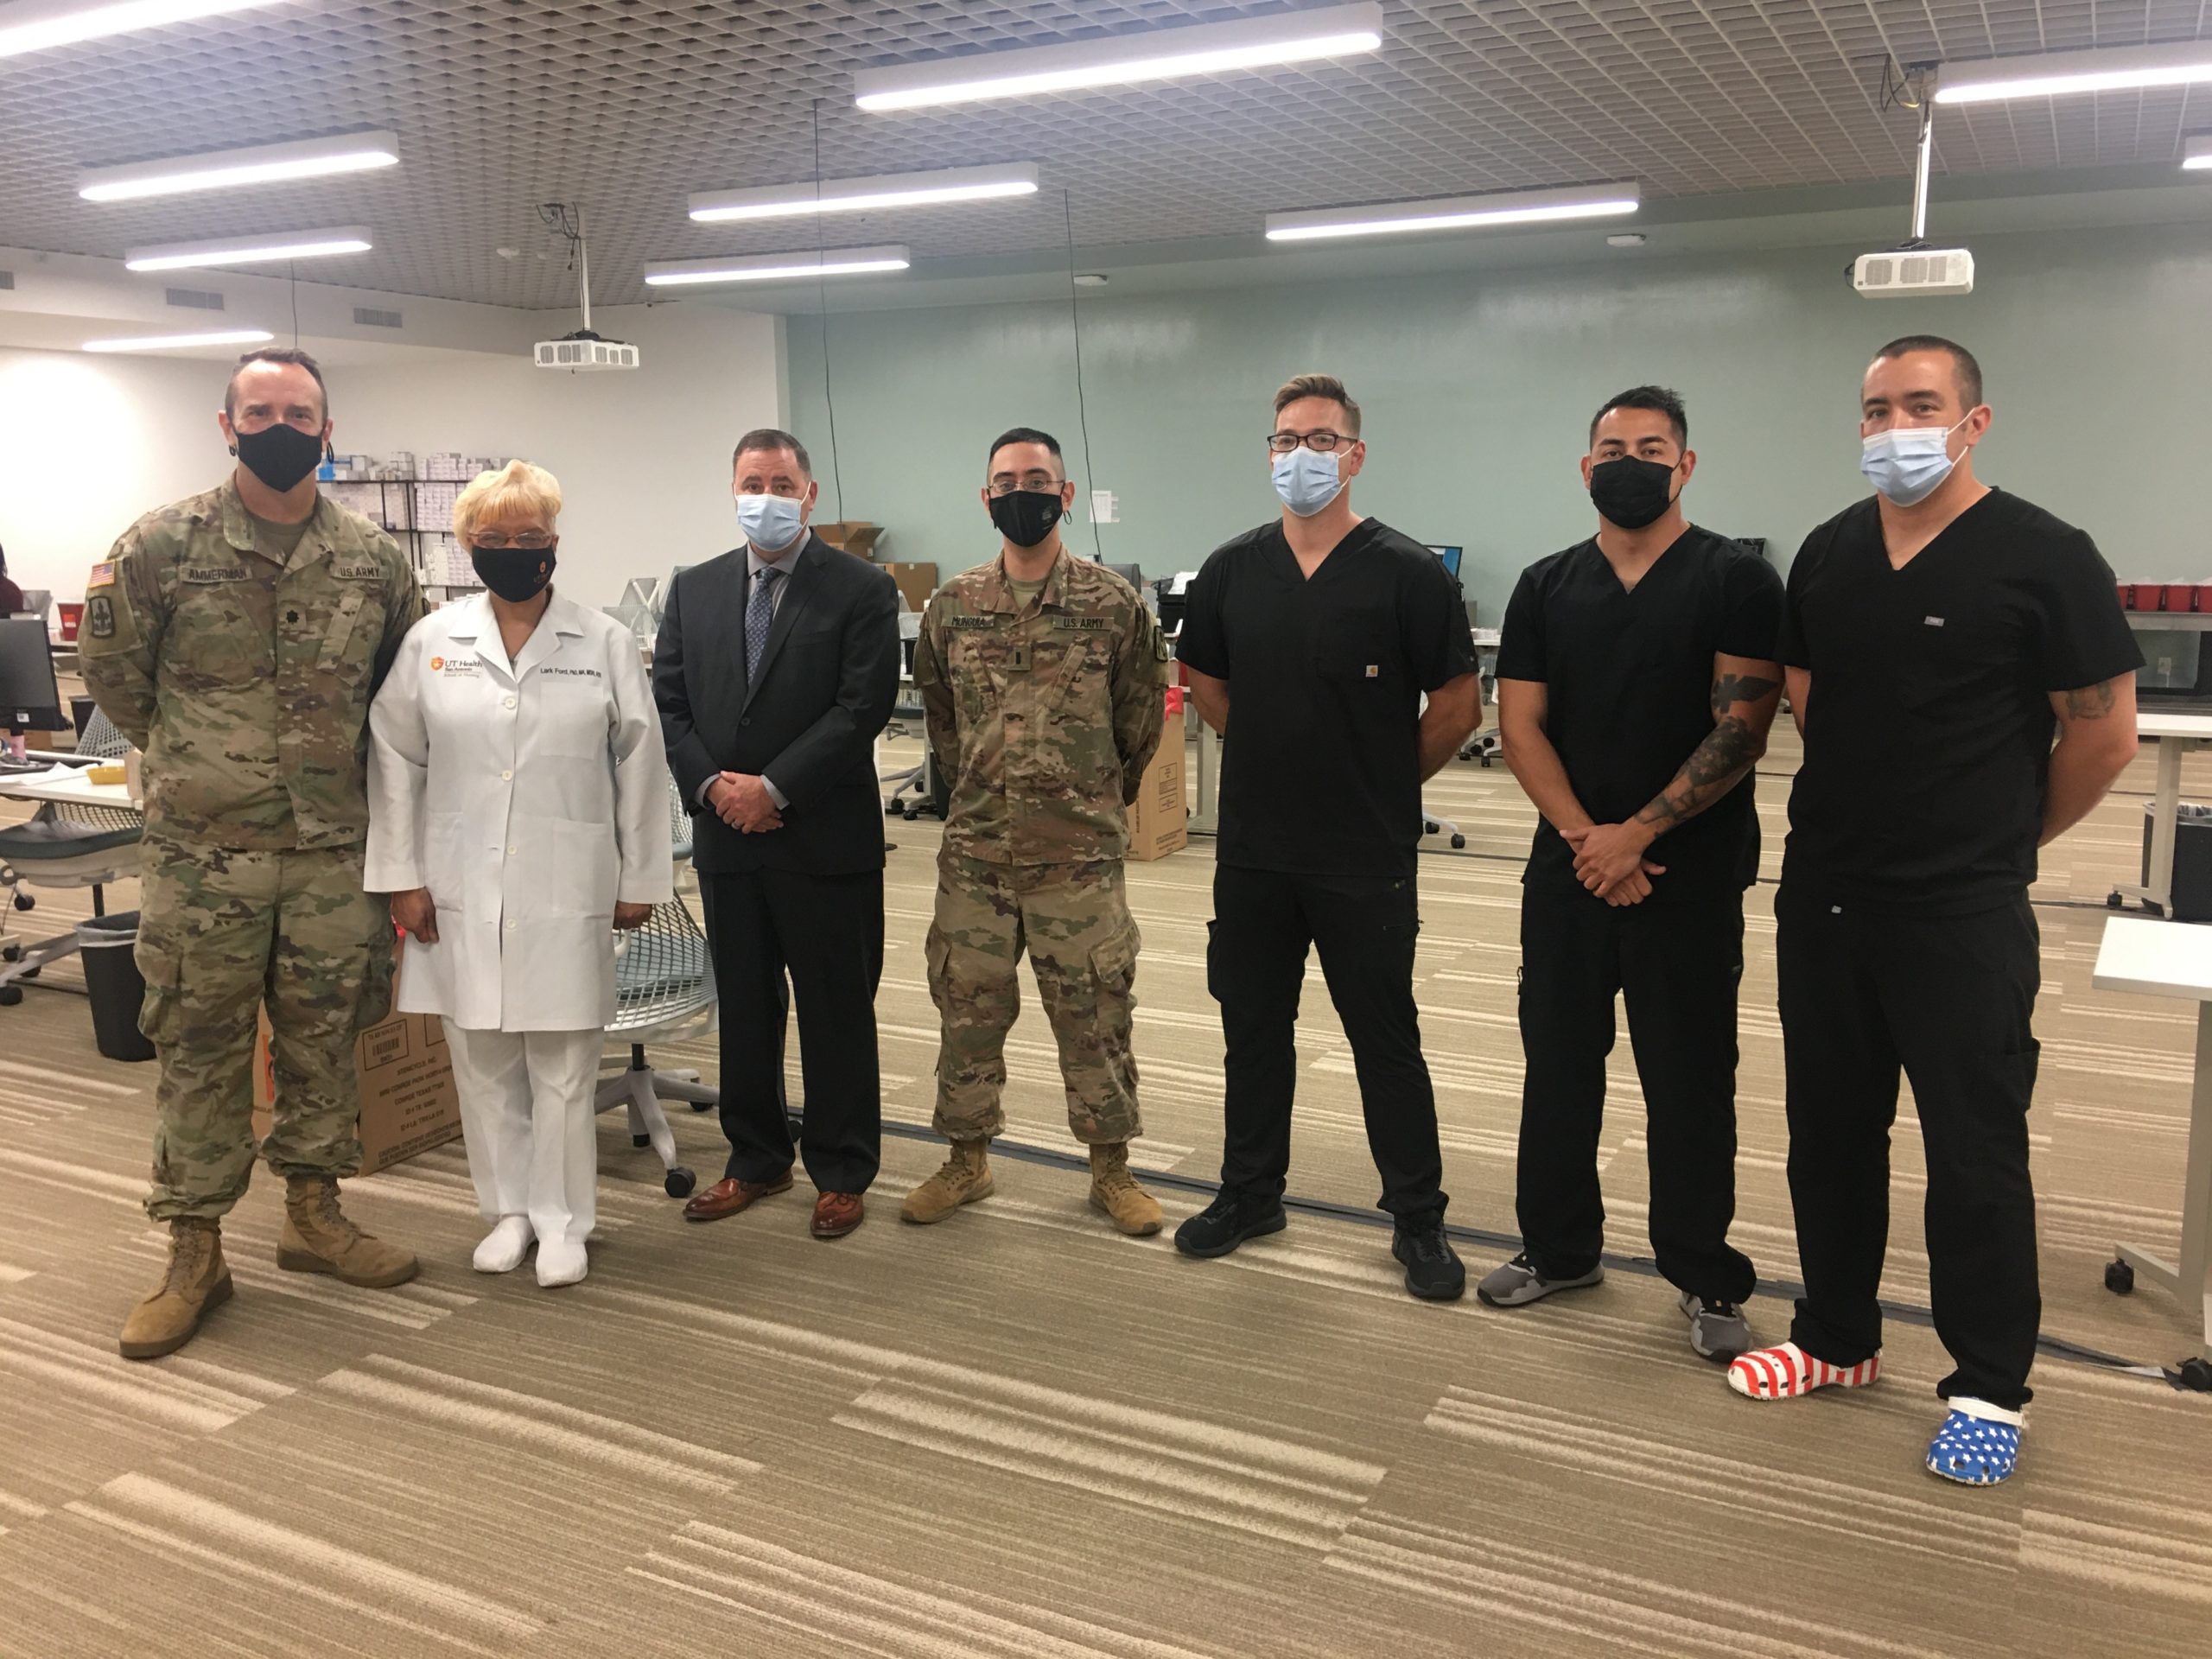 group photo of members of the Texas National Guard and UT Health San Antonio.